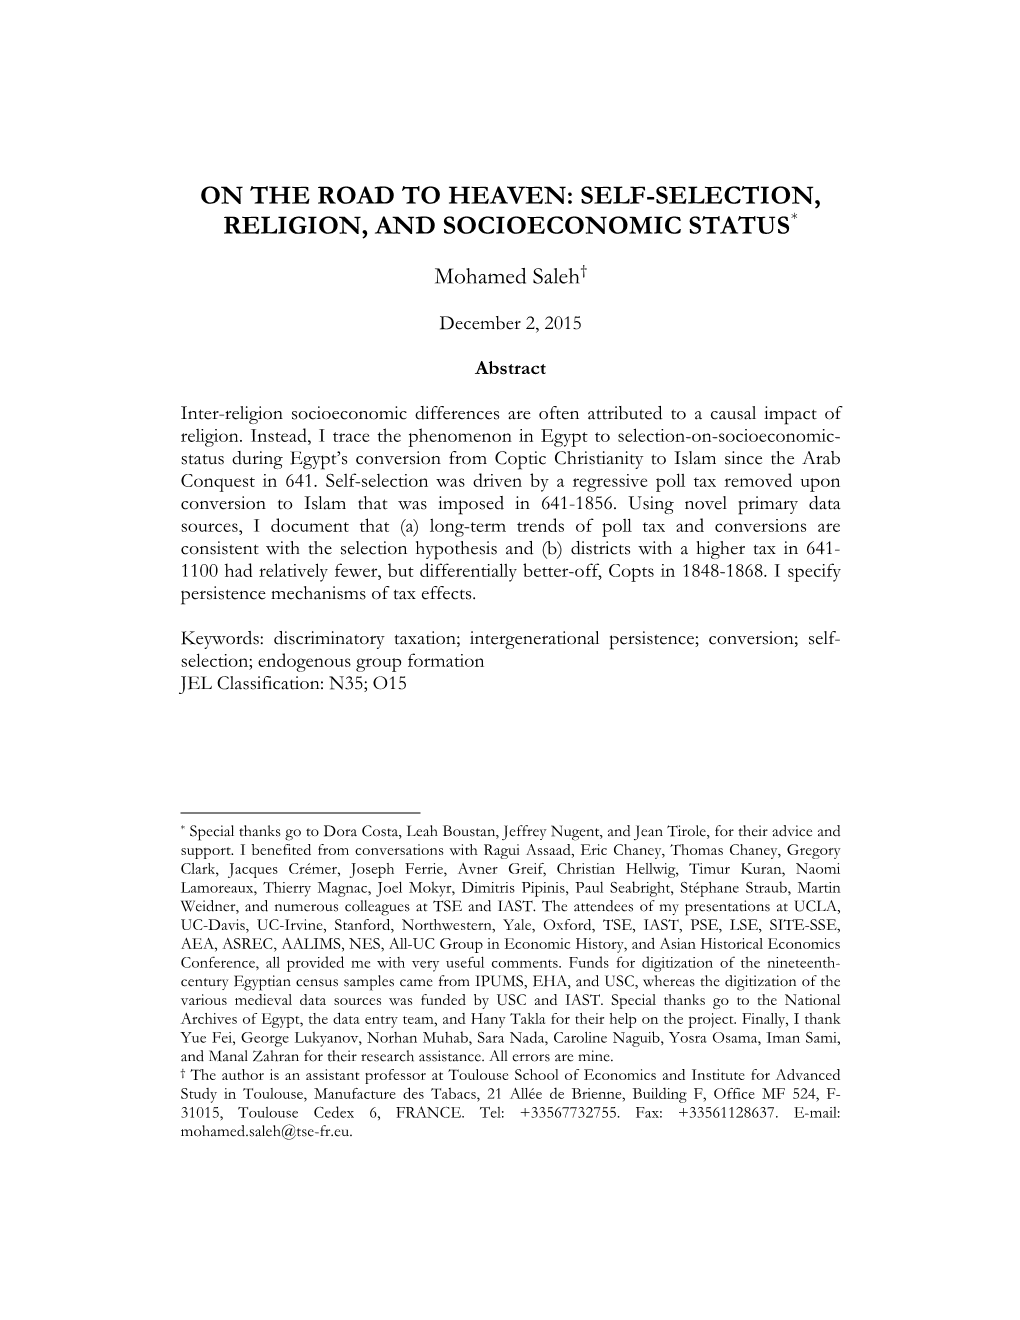 On the Road to Heaven: Self-Selection, Religion, and Socioeconomic Status*